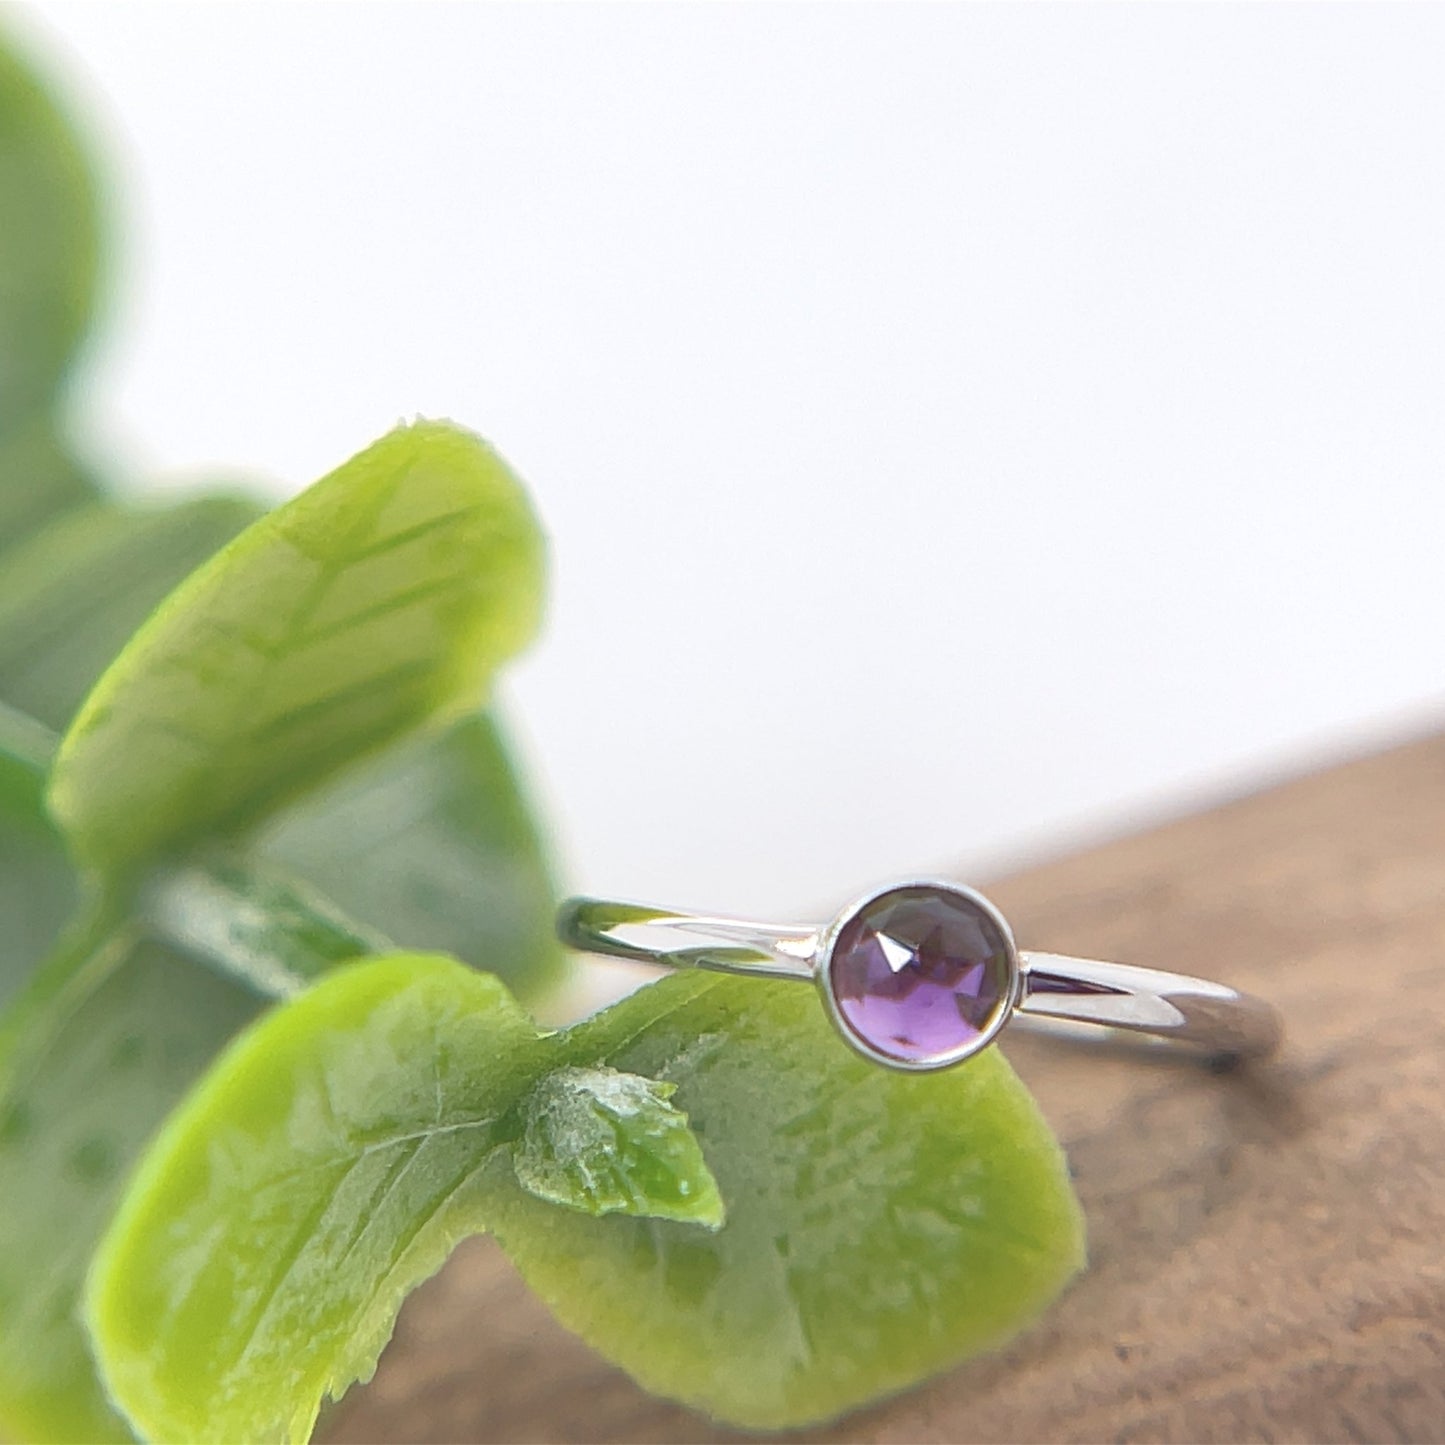 Fixed Ring with 2.5mm Open Back Round Bezel - Navel Orientation - Agave in Bloom